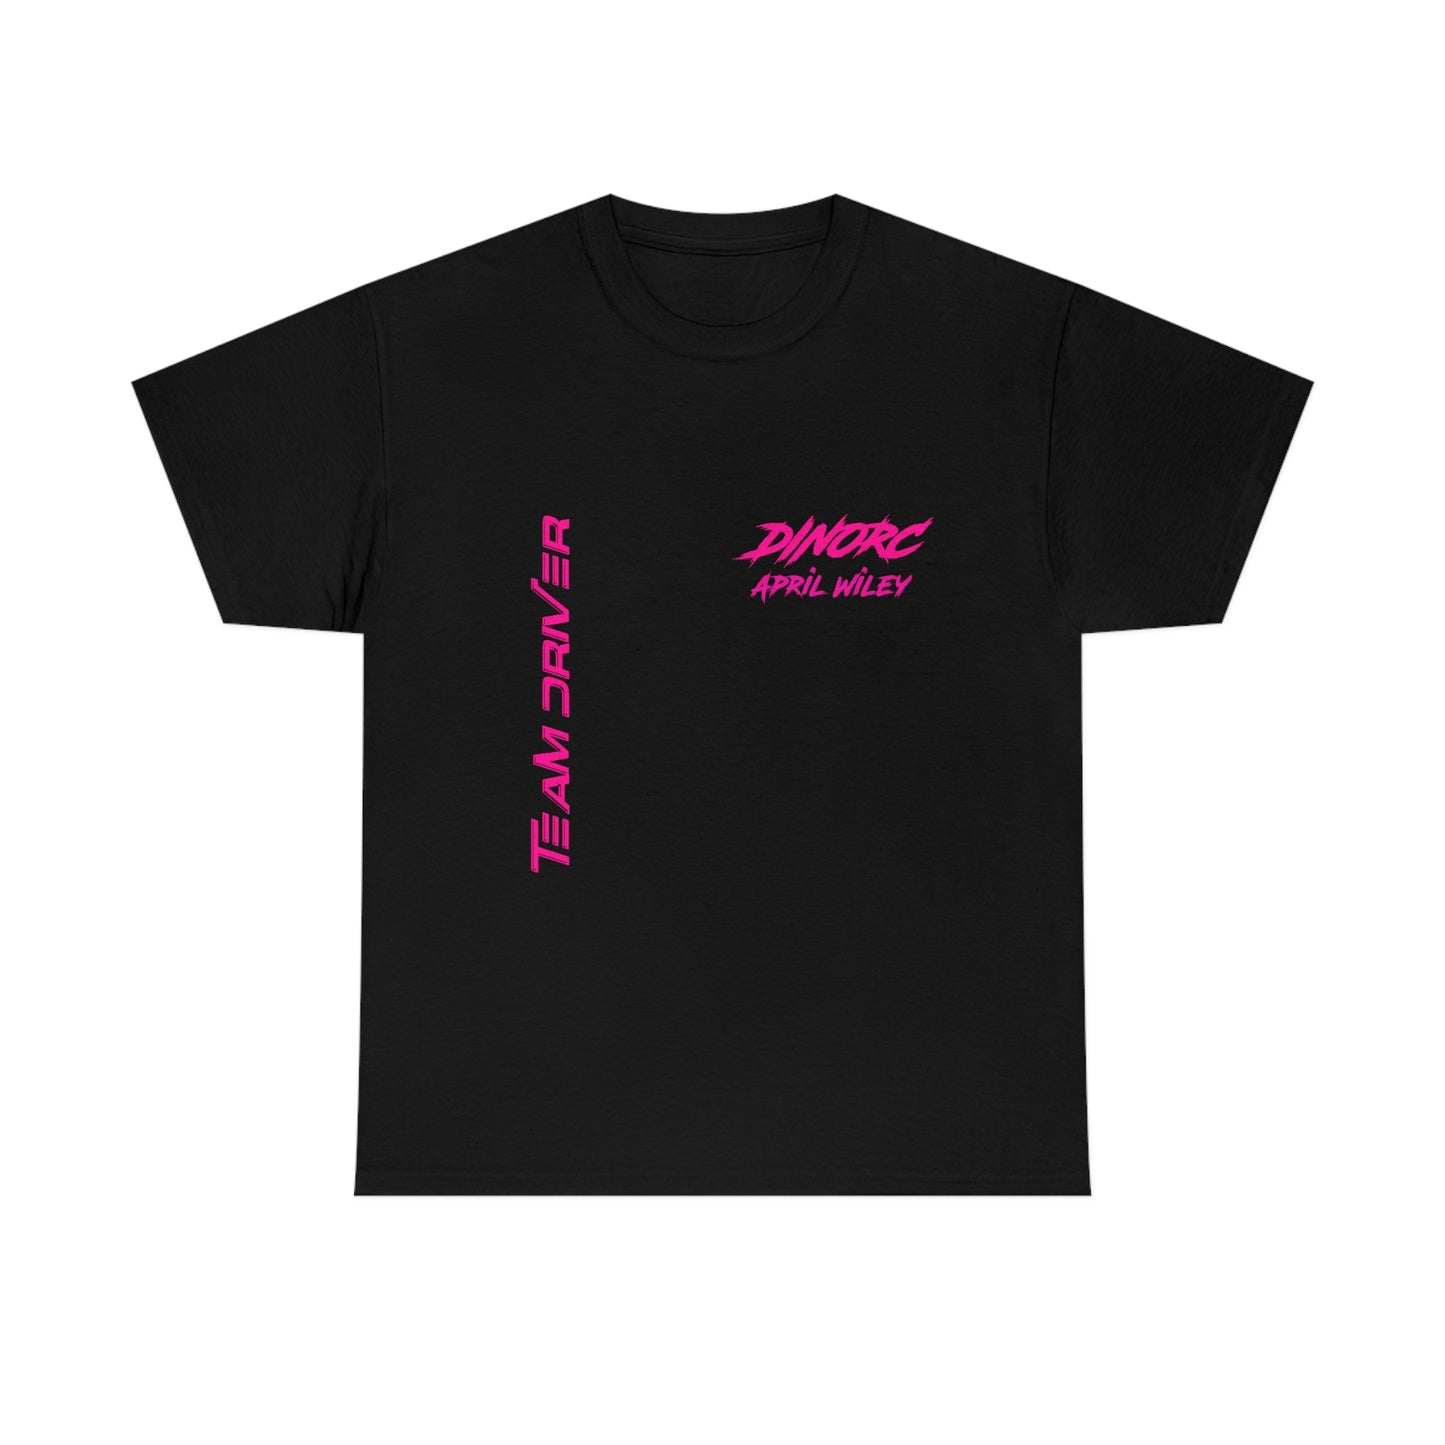 Vertical Team Driver April Wiley Dino's Divas Front and Back DinoRc Logo T-Shirt S-5x 5 colors